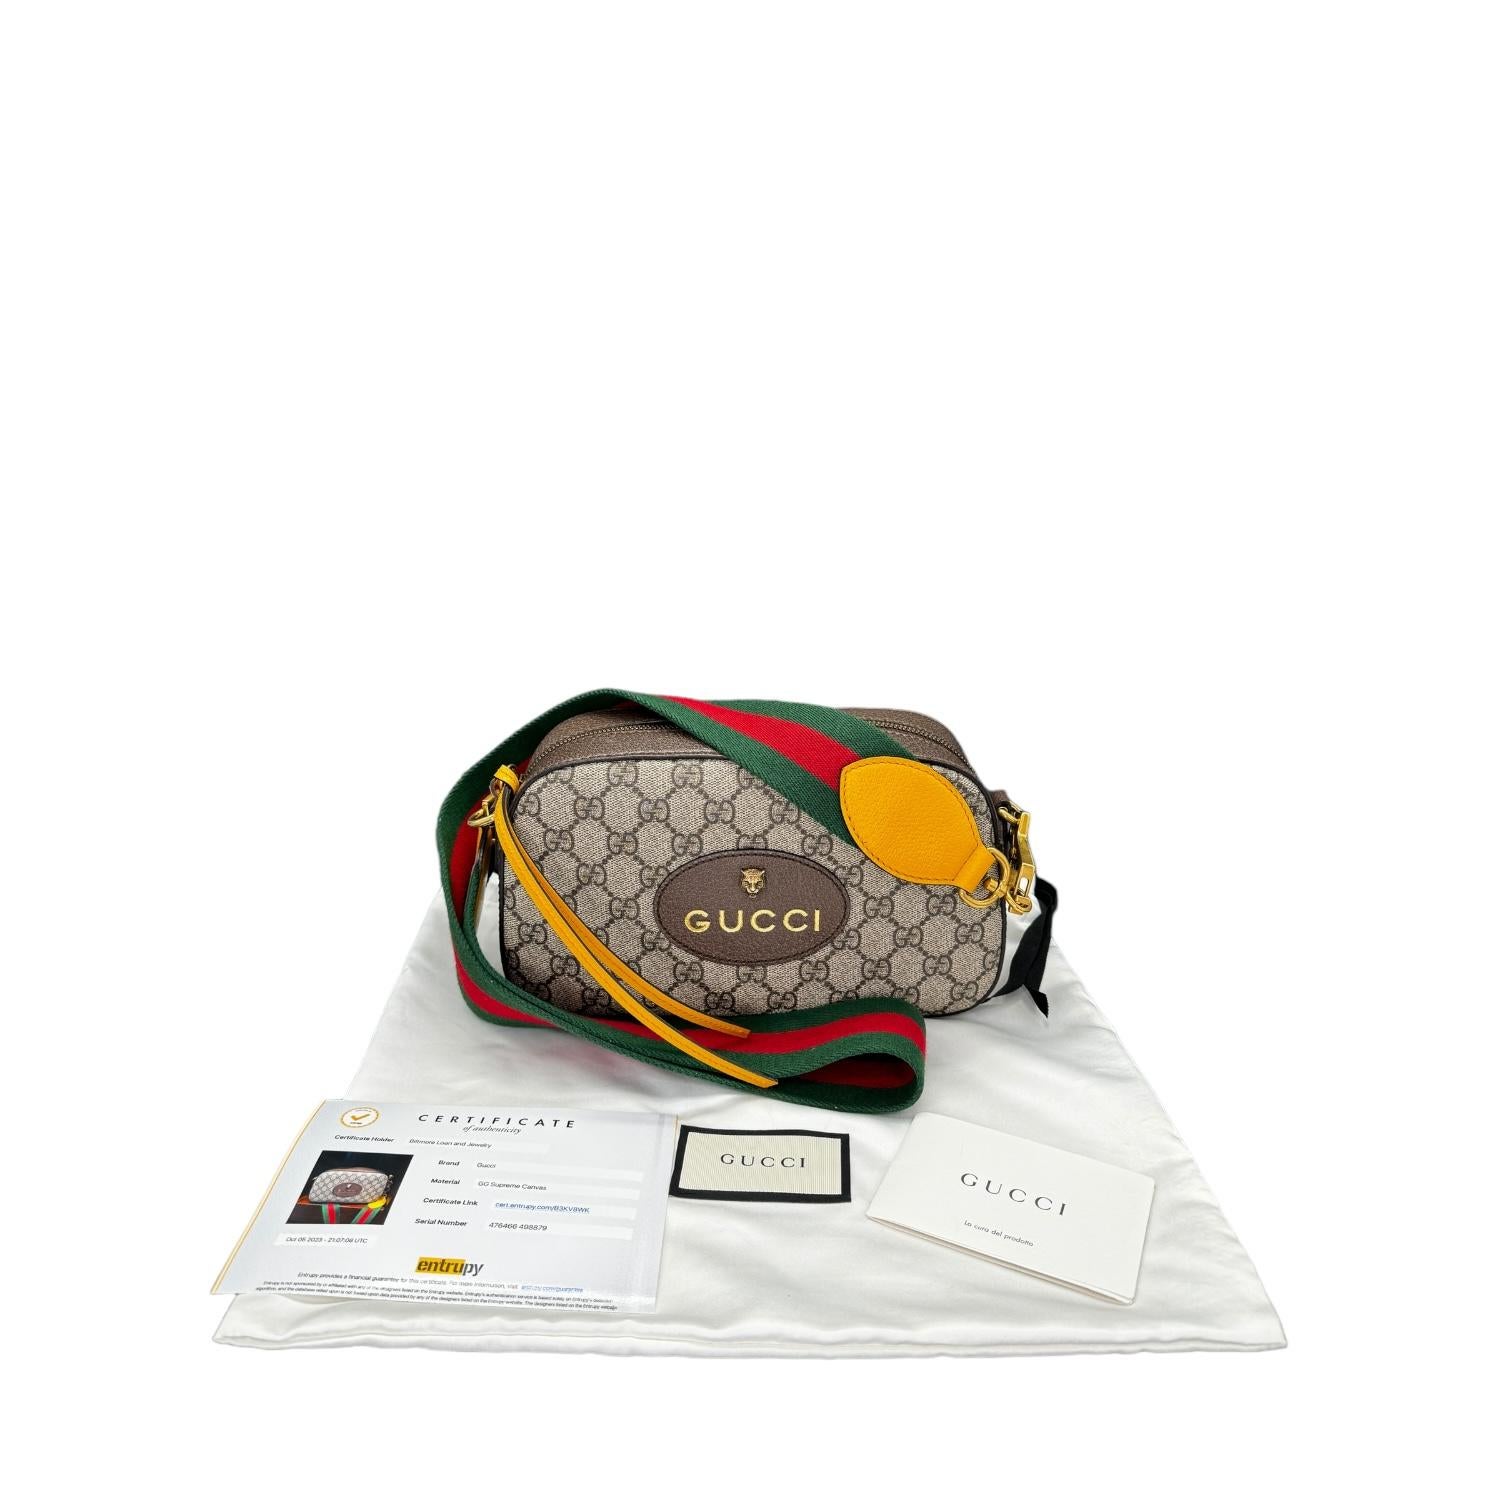 This stylish messenger bag is crafted of classic brown on beige Gucci GG monogram coated canvas, with dark brown leather trim, and an oval Gucci tag with a brass tiger head on the front. The bag features a green and red web stripe canvas shoulder